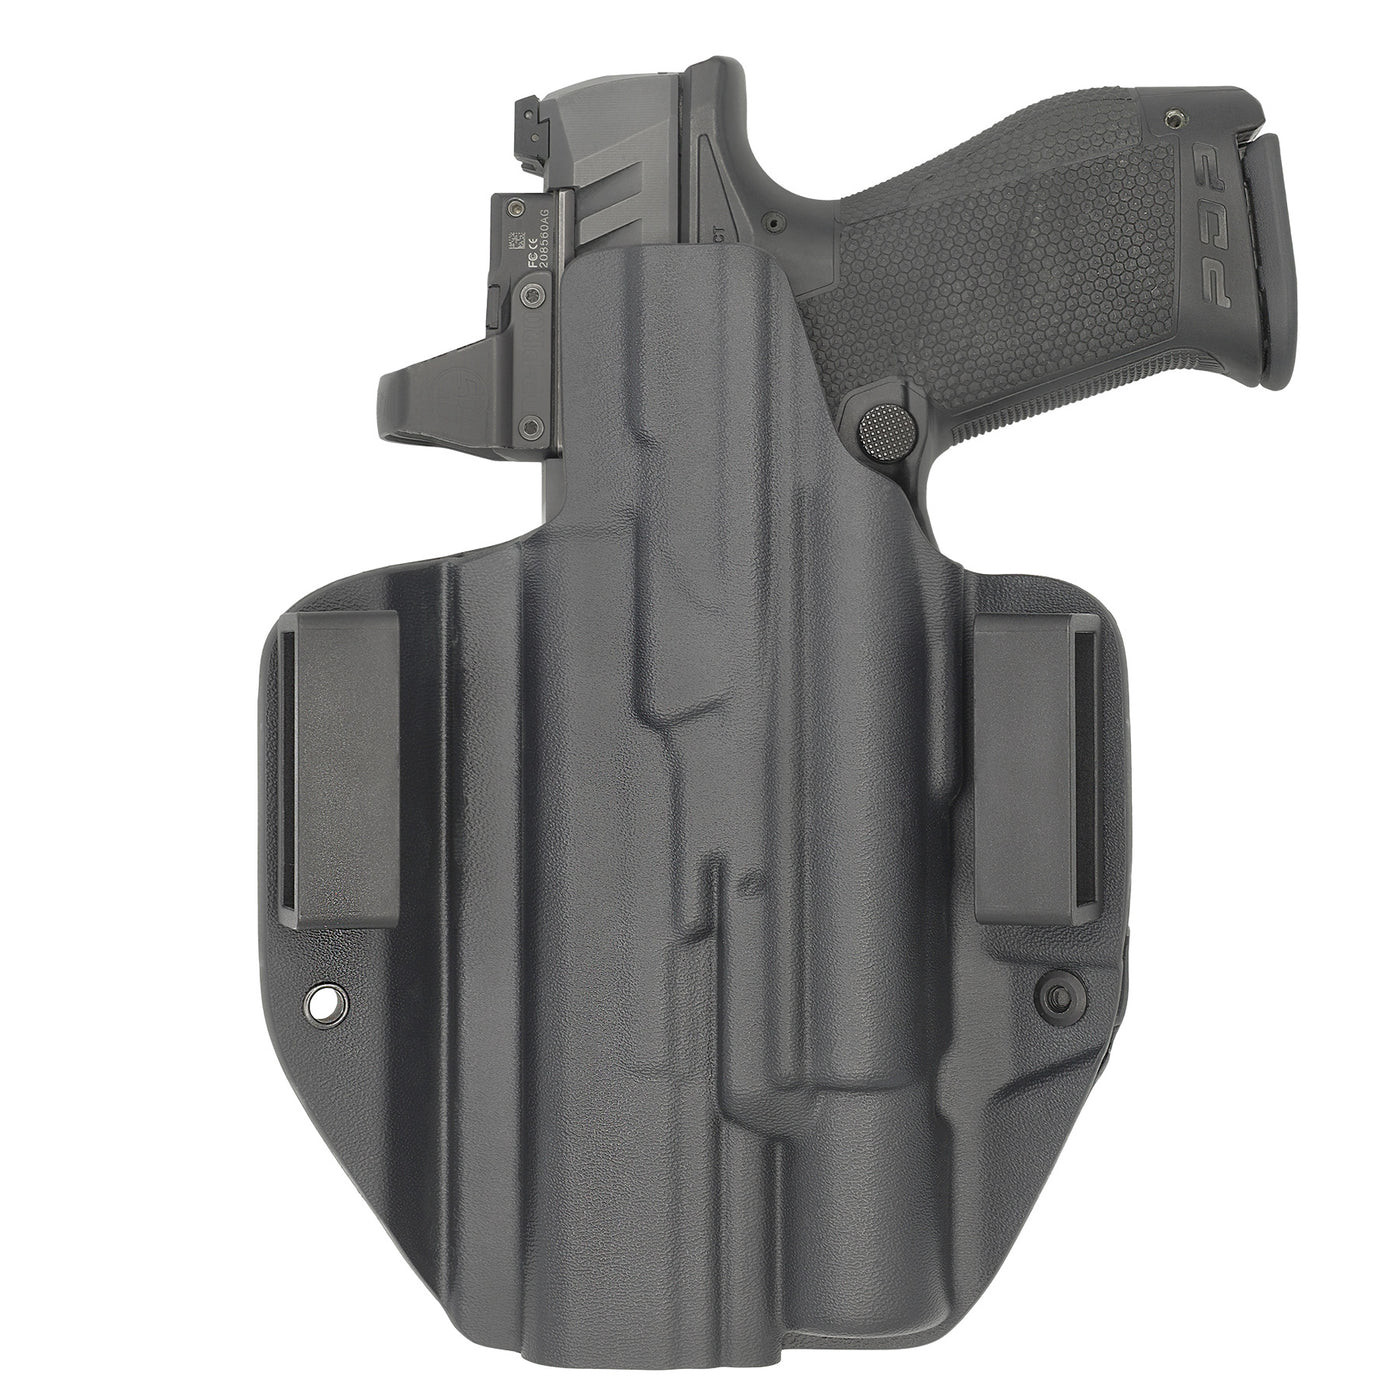 C&G holsters Quickship OWB Tactical FN 509 Surefire X300 in holstered position back view